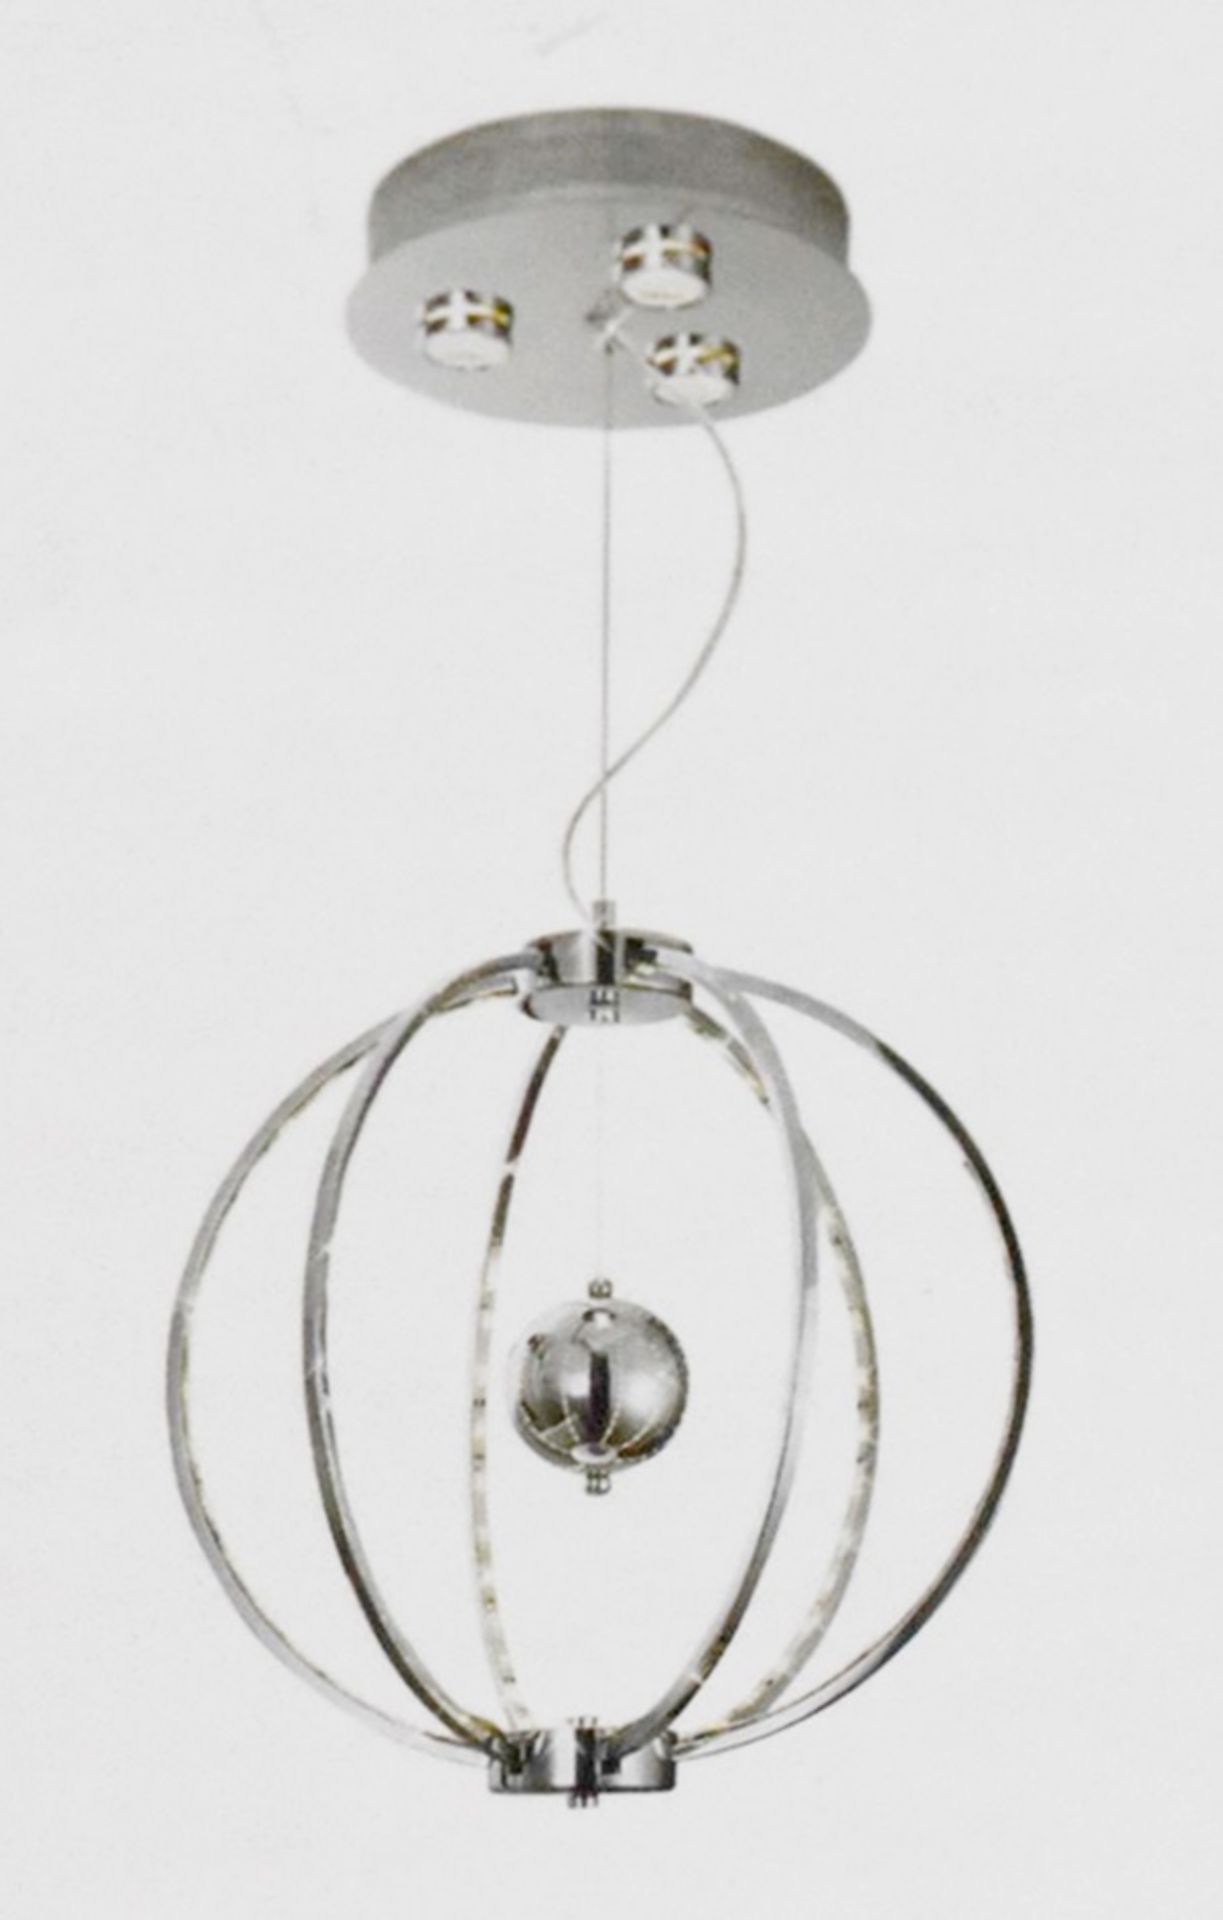 1 x Searchlight Gyro LED Small Ceiling Pendant, Polished Chrome - New Boxed Stock - Ref: 2575-132CC